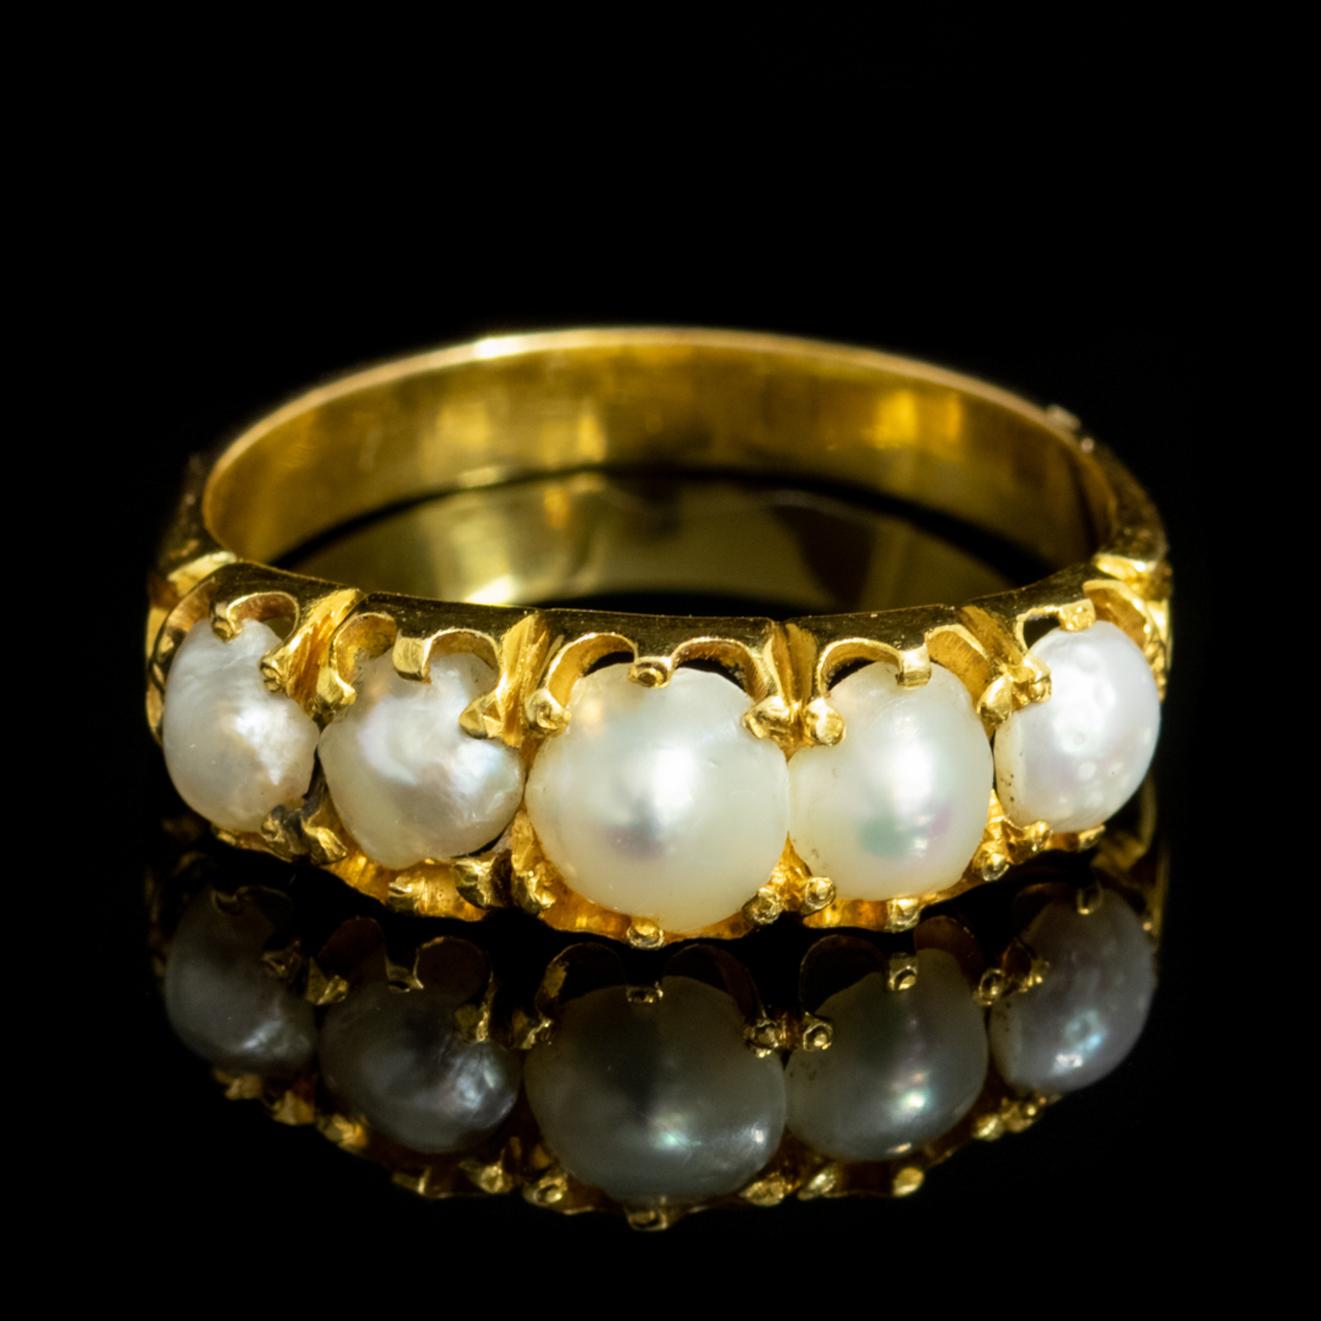 This gorgeous Victorian ring, produced around 1860, features five beautiful Natural Pearls set in the face of an 18ct Yellow Gold gallery.

Pearls are a true gift from Mother Nature and symbolise purity, innocence and beauty, which is why they have